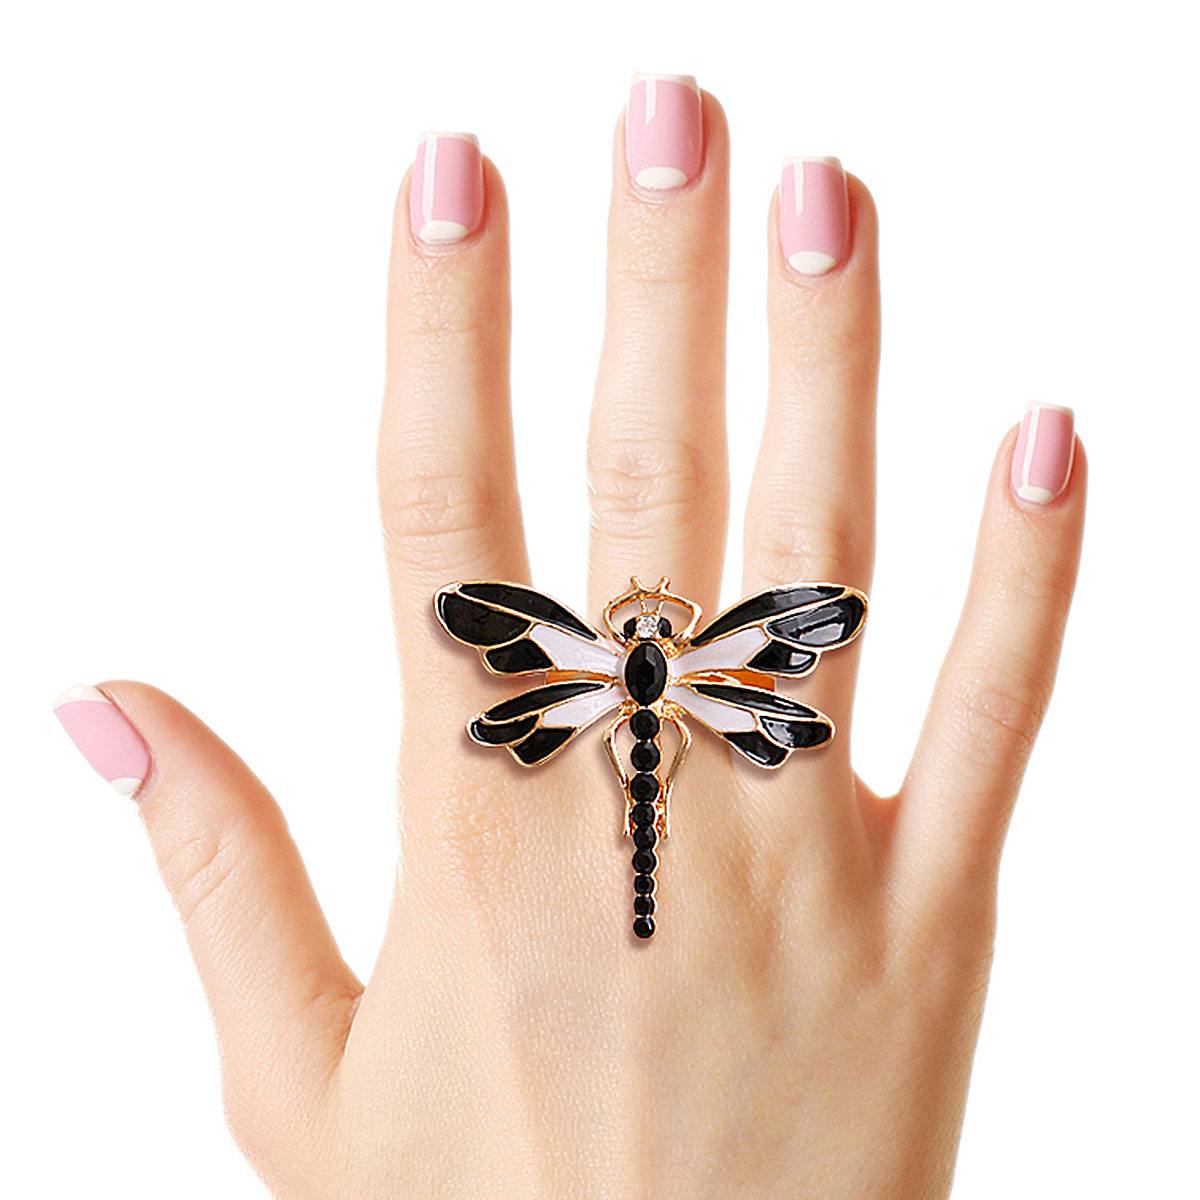 Black and White Dragon Fly Ring